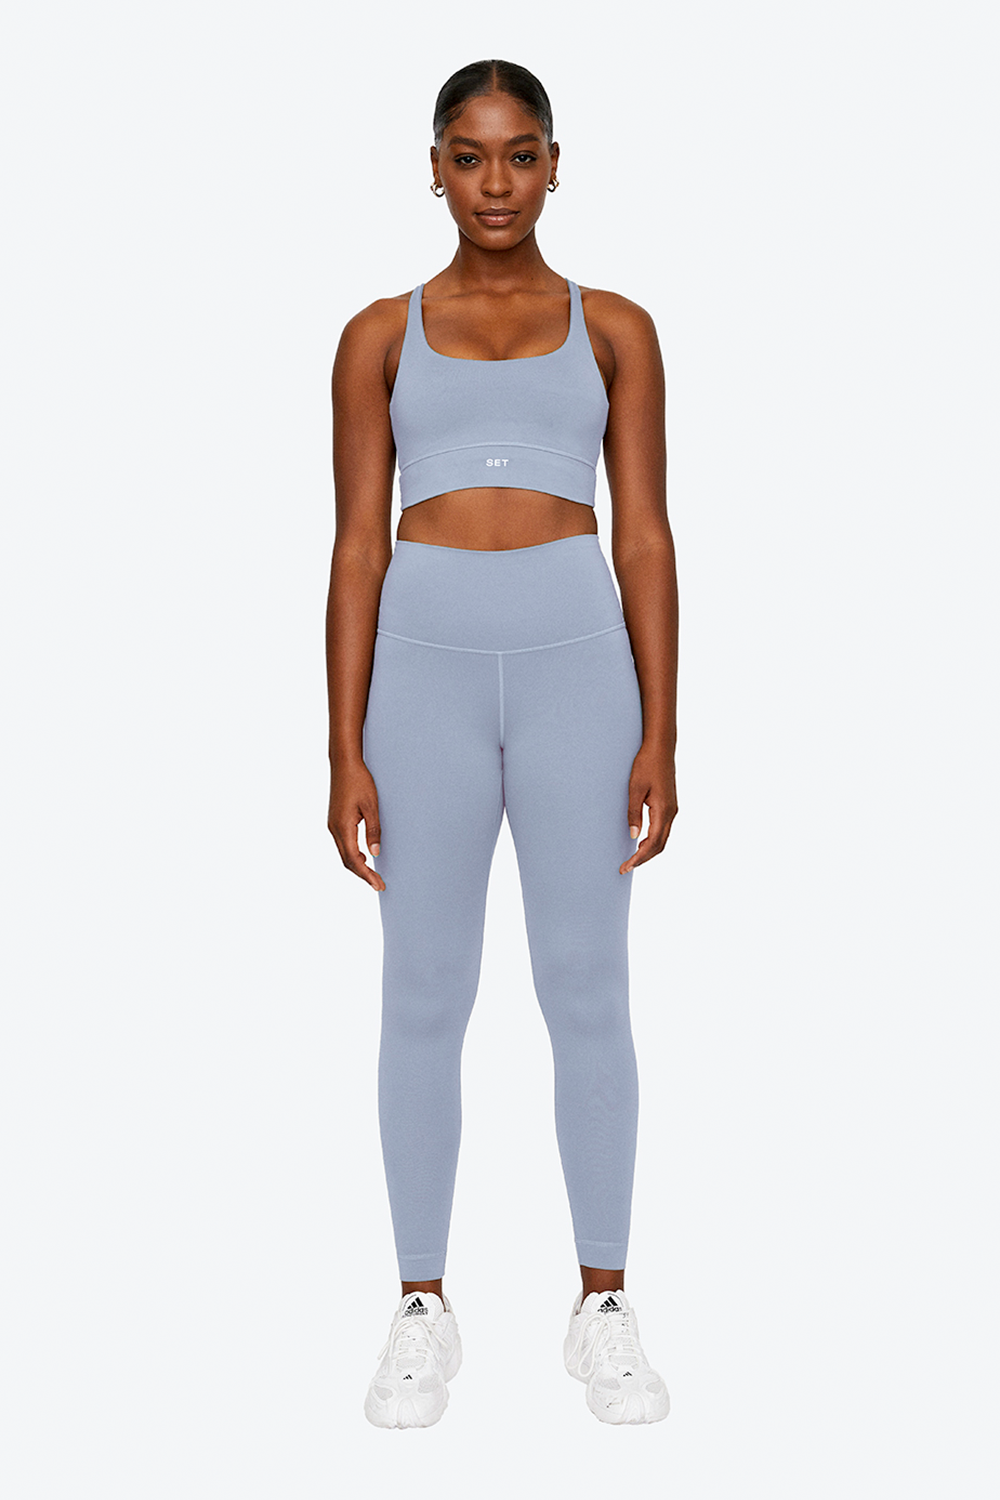 New Year Fitness Goals? 14 Activewear Brands To Keep You Motivated And ...